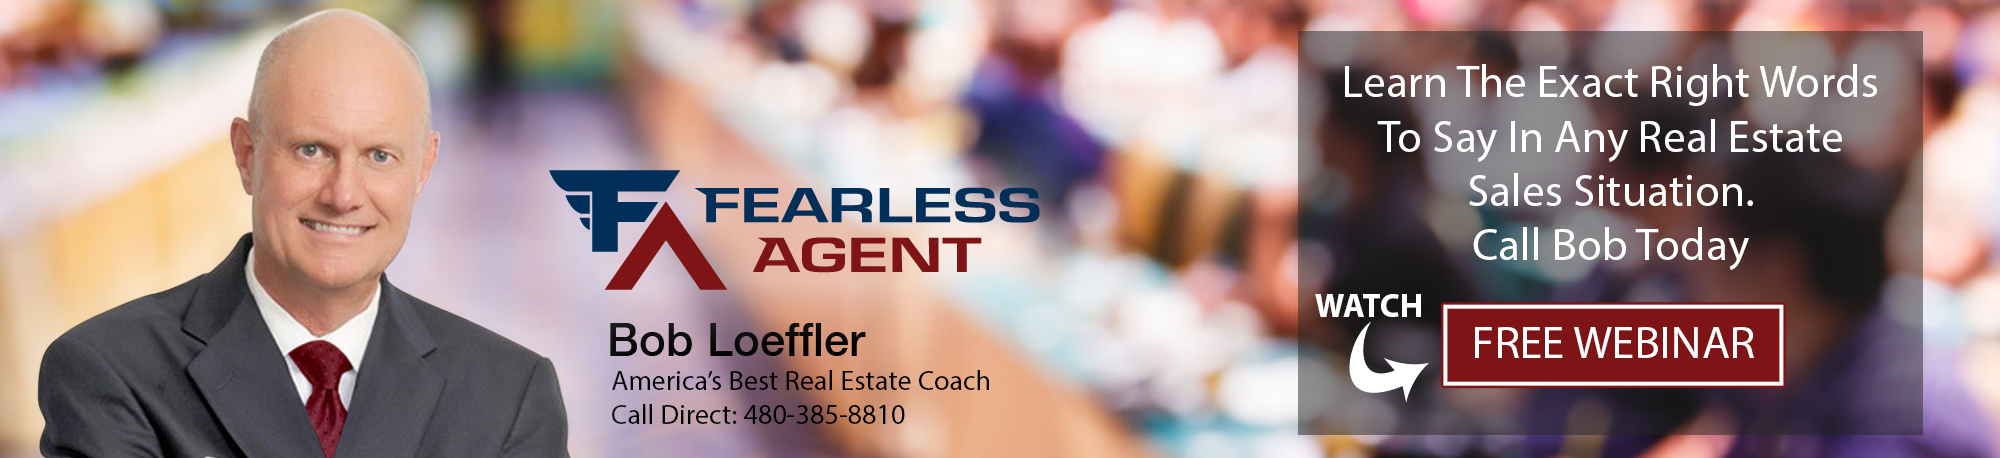 Top 50 Real Estate Coaches in 2021 - AgentFire